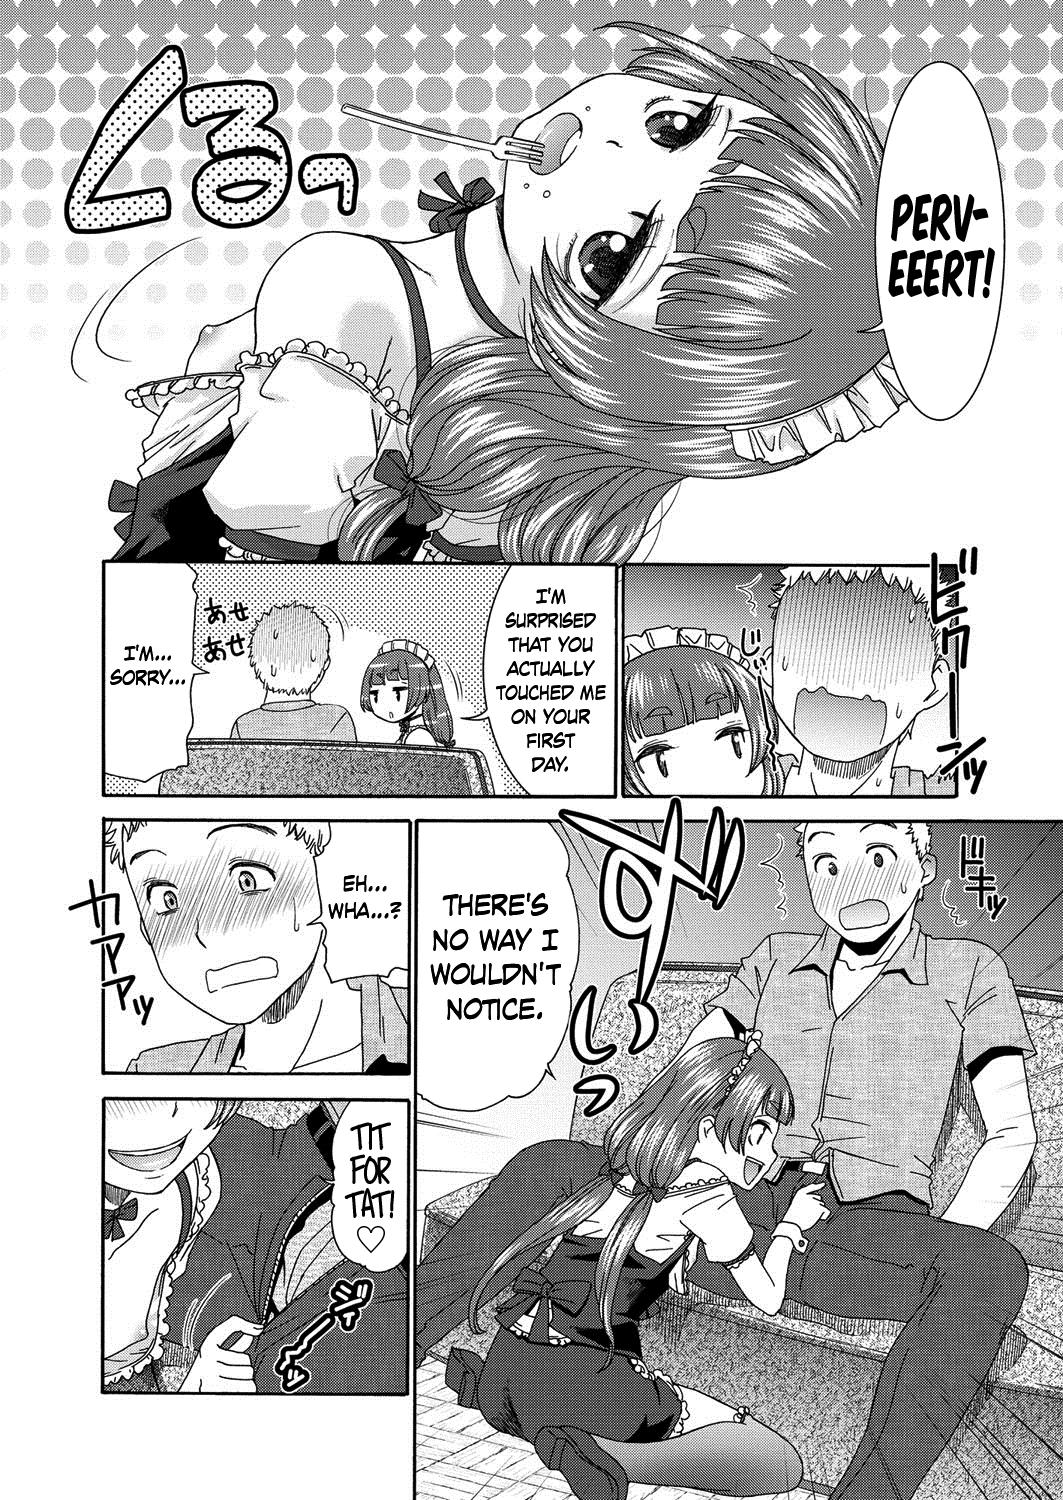 Hoe Sweet Maid Pervs - Page 8